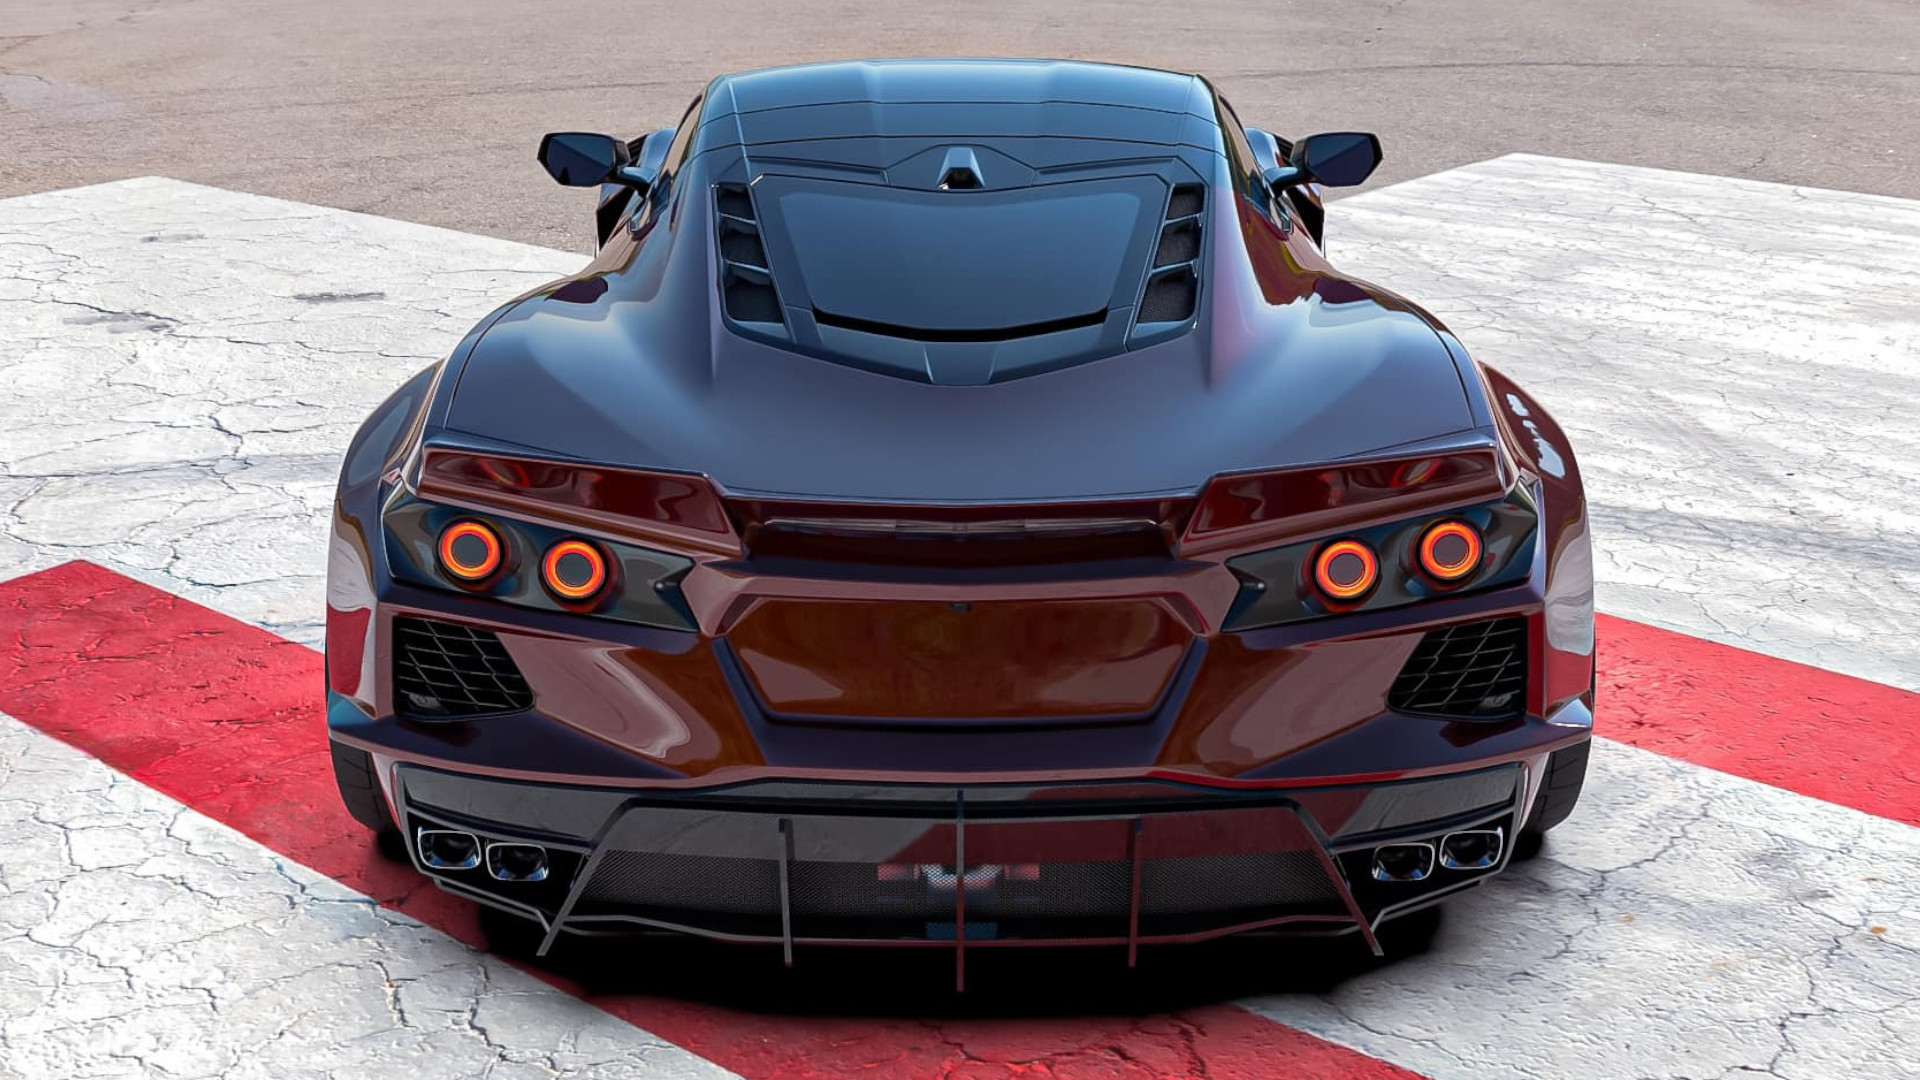 C8 Chevy Corvette With Round Taillights Mod Doesn’t Look Awful